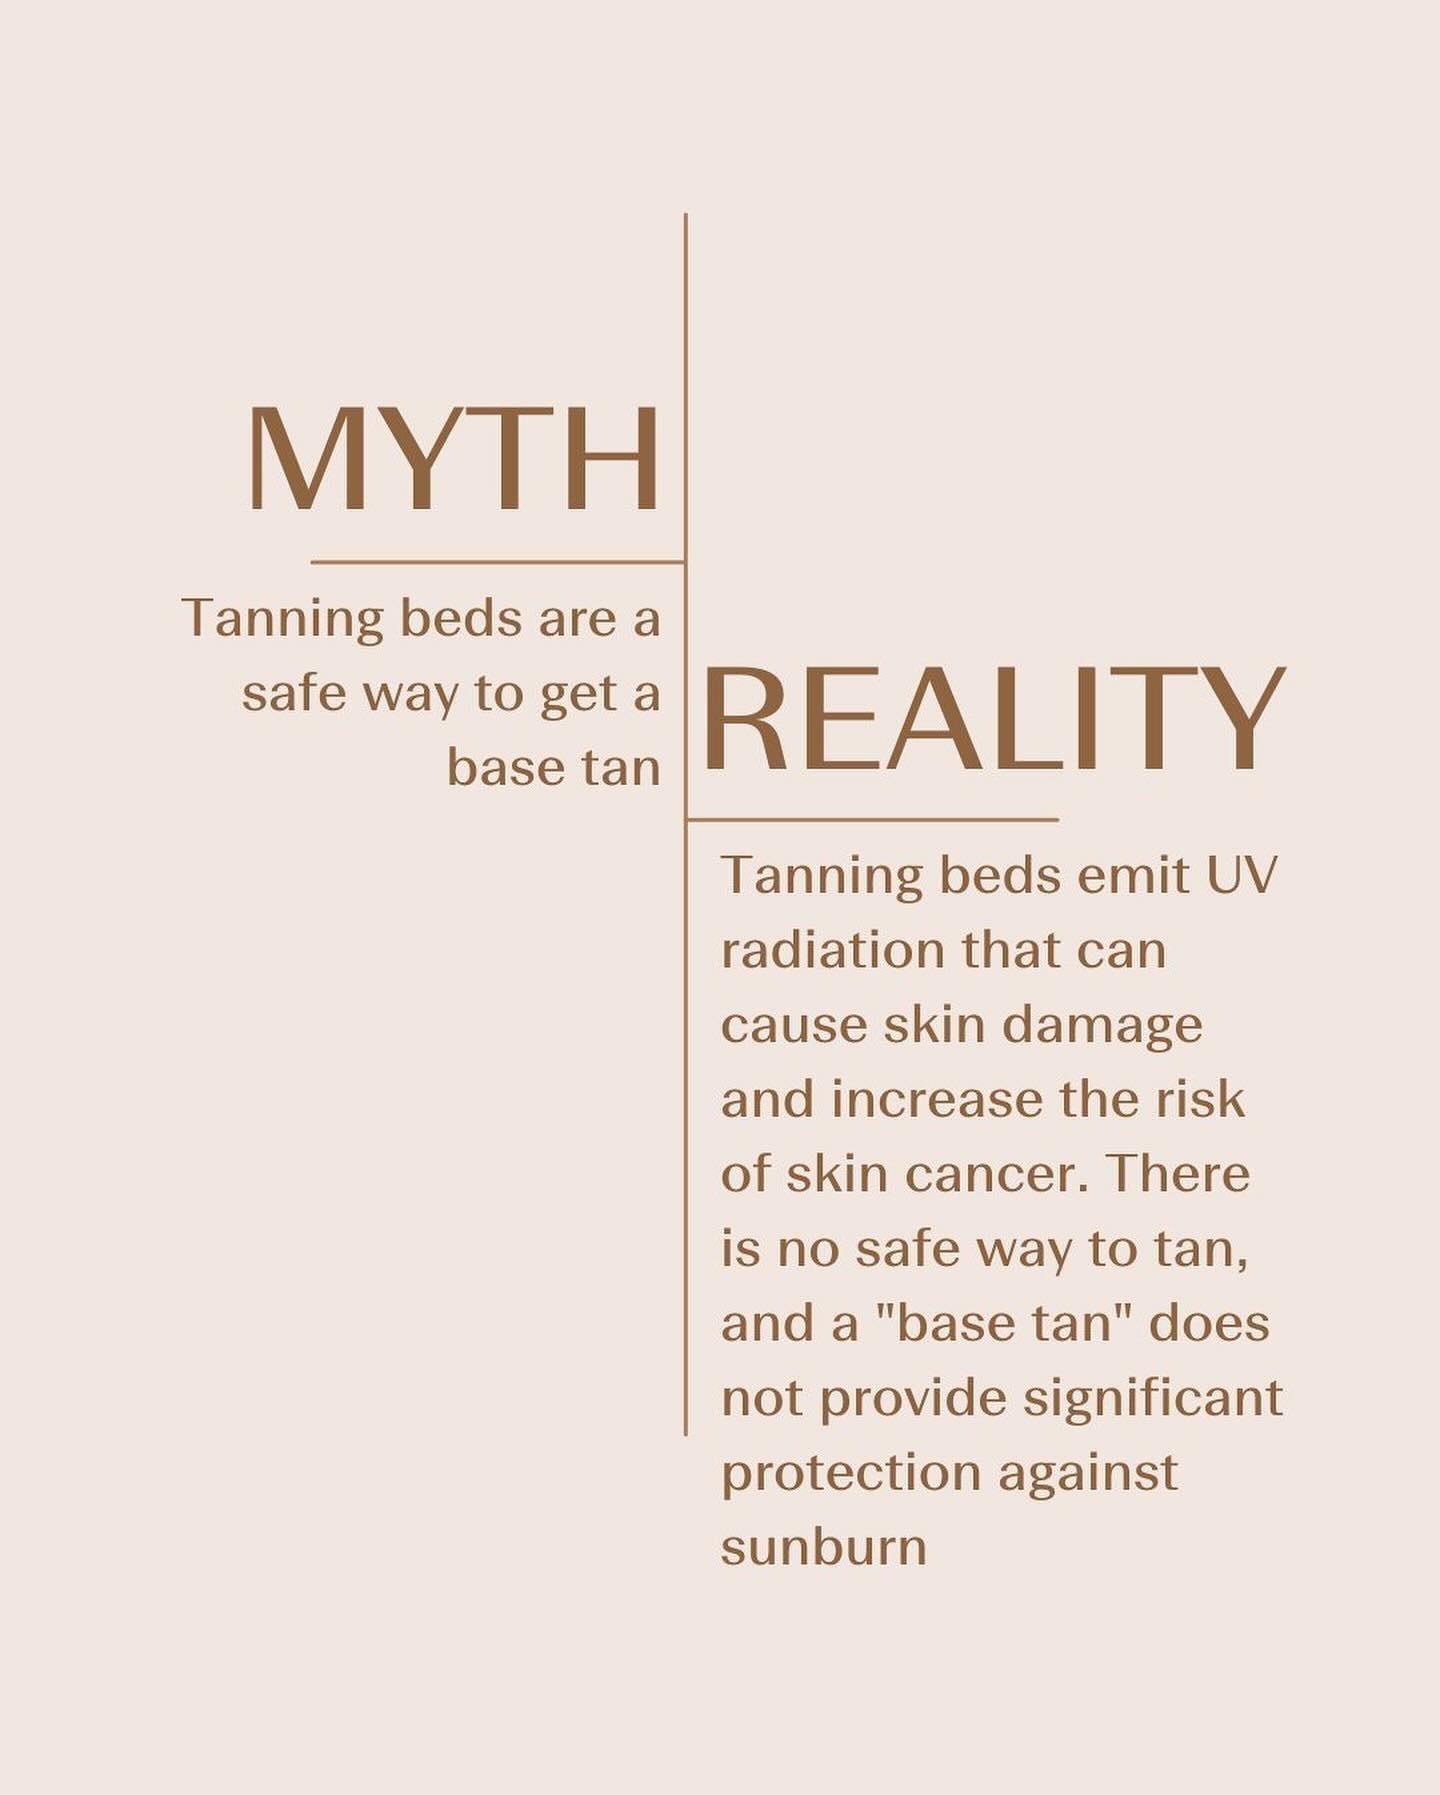 UV exposure myths vs facts: PART ONE

Swipe to see more &gt; &gt; &gt;